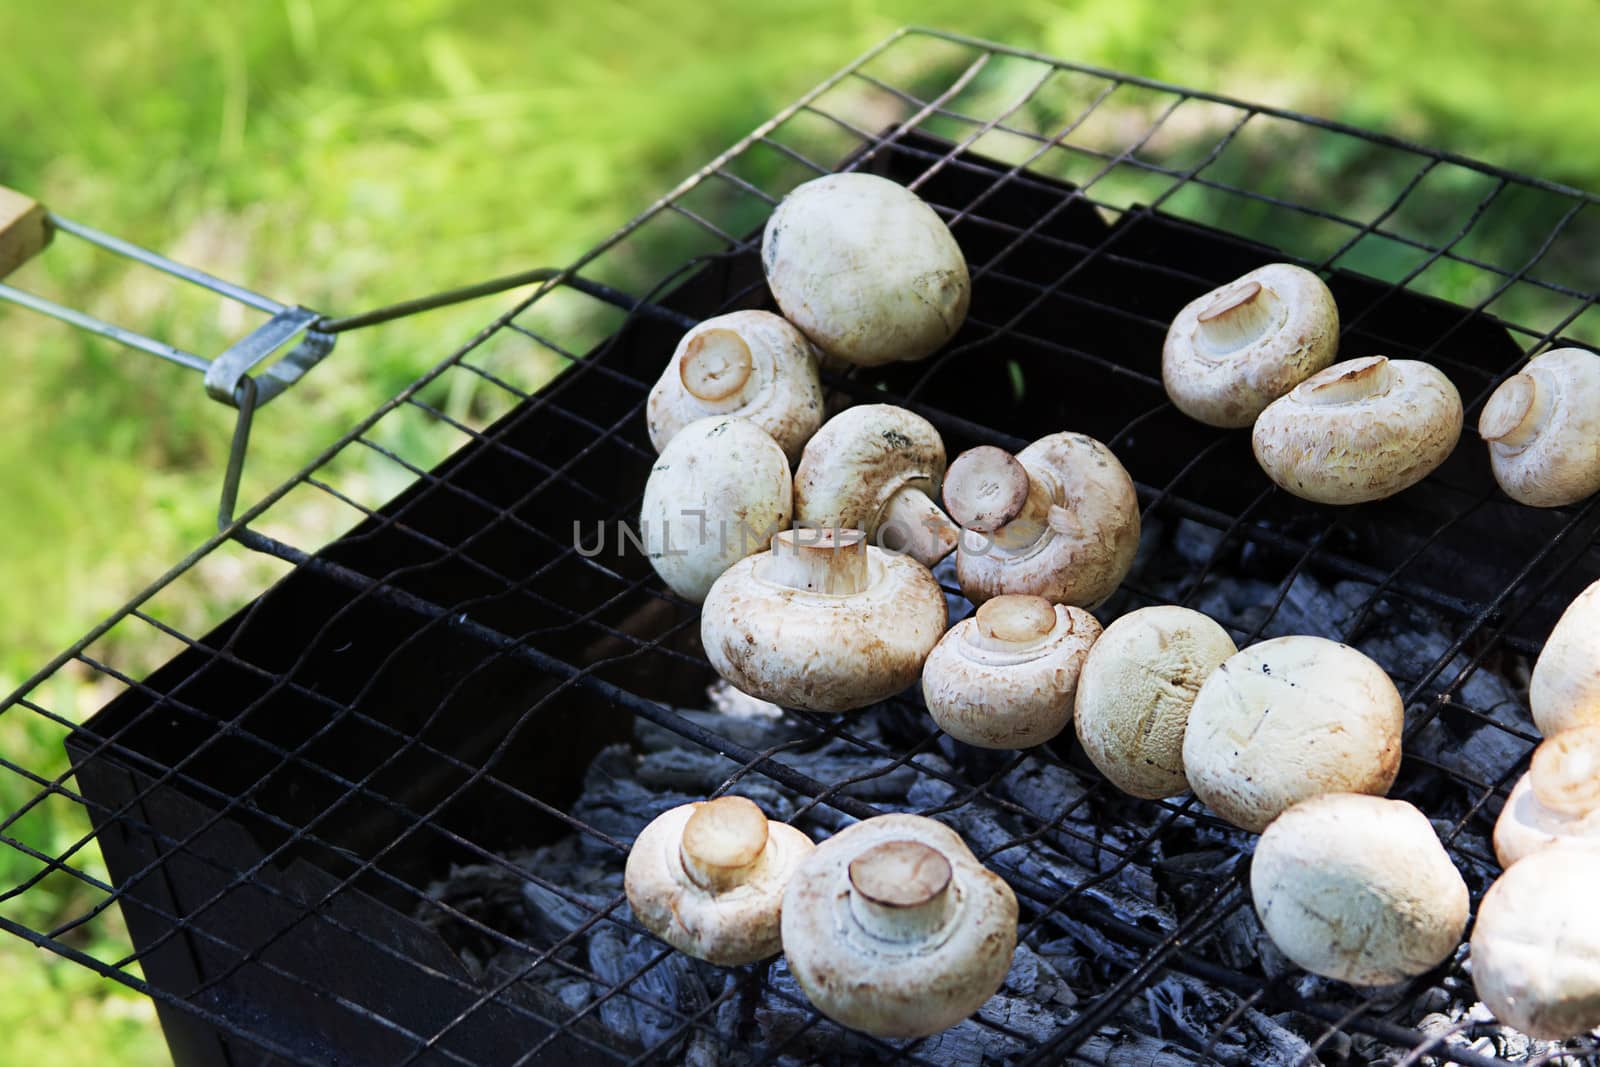 Mushrooms on the grill by Angel_a